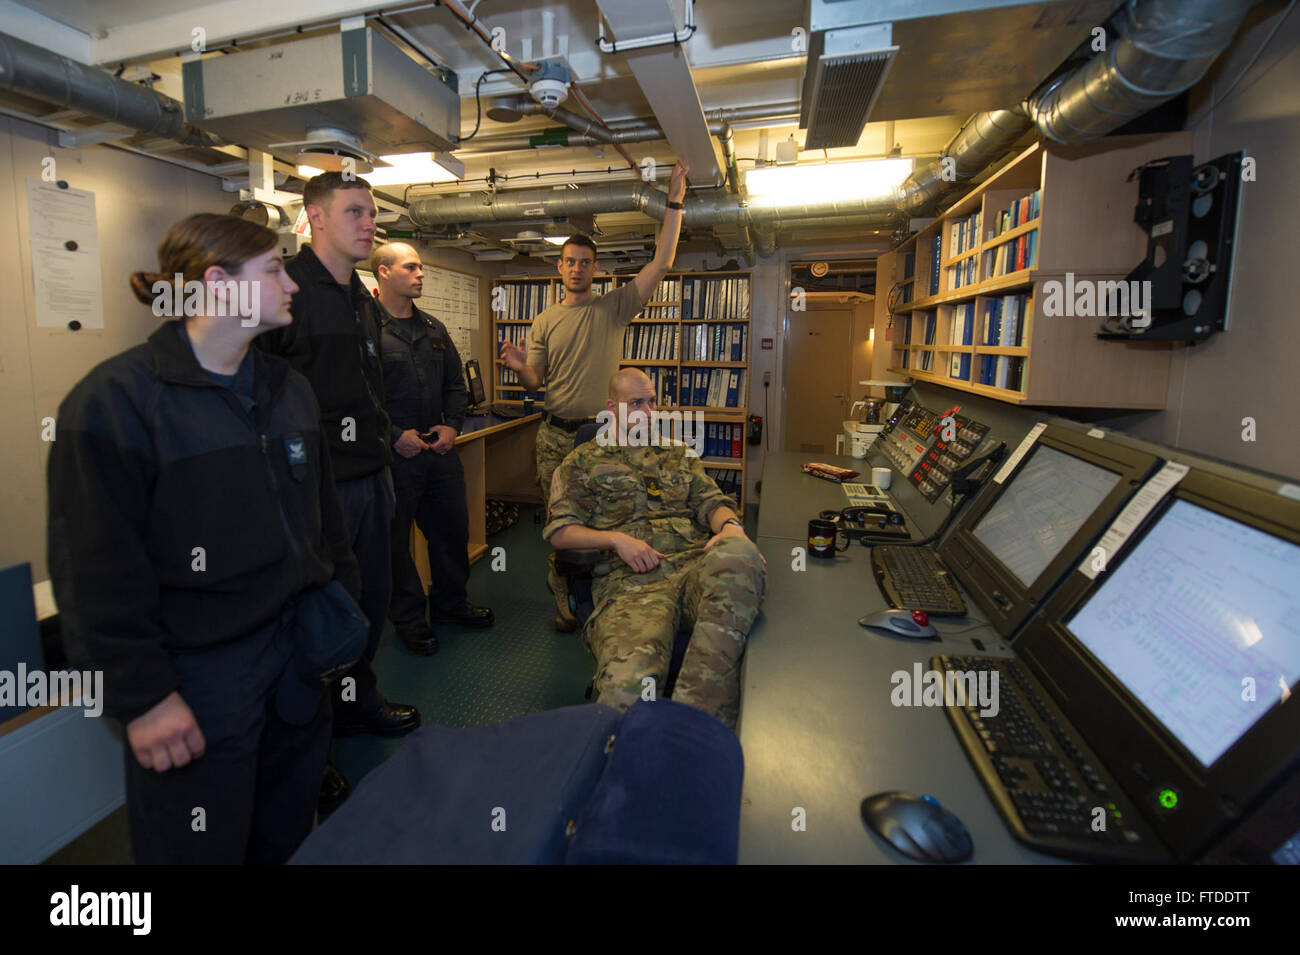 150617-N-ZE250-042 BALTIC SEA (June 17, 2015) Sailors from USS Jason Dunham (DDG 109) tour the central control station aboard Danish Navy Frigate HDMS Absalon (L16) June 16, 2015. Jason Dunham, an Arleigh Burke-class guided-missile destroyer homeported in Norfolk, is participating in exercise Baltic Operations (BALTOPS) 2015. BALTOPS is an annually recurring multinational exercise designed to enhance flexibility and interoperability, as well as demonstrate resolve of Allied and partner forces to defend the Baltic region. (U.S. Navy photo by Mass Communication Specialist 3rd Class Weston Jones/ Stock Photo